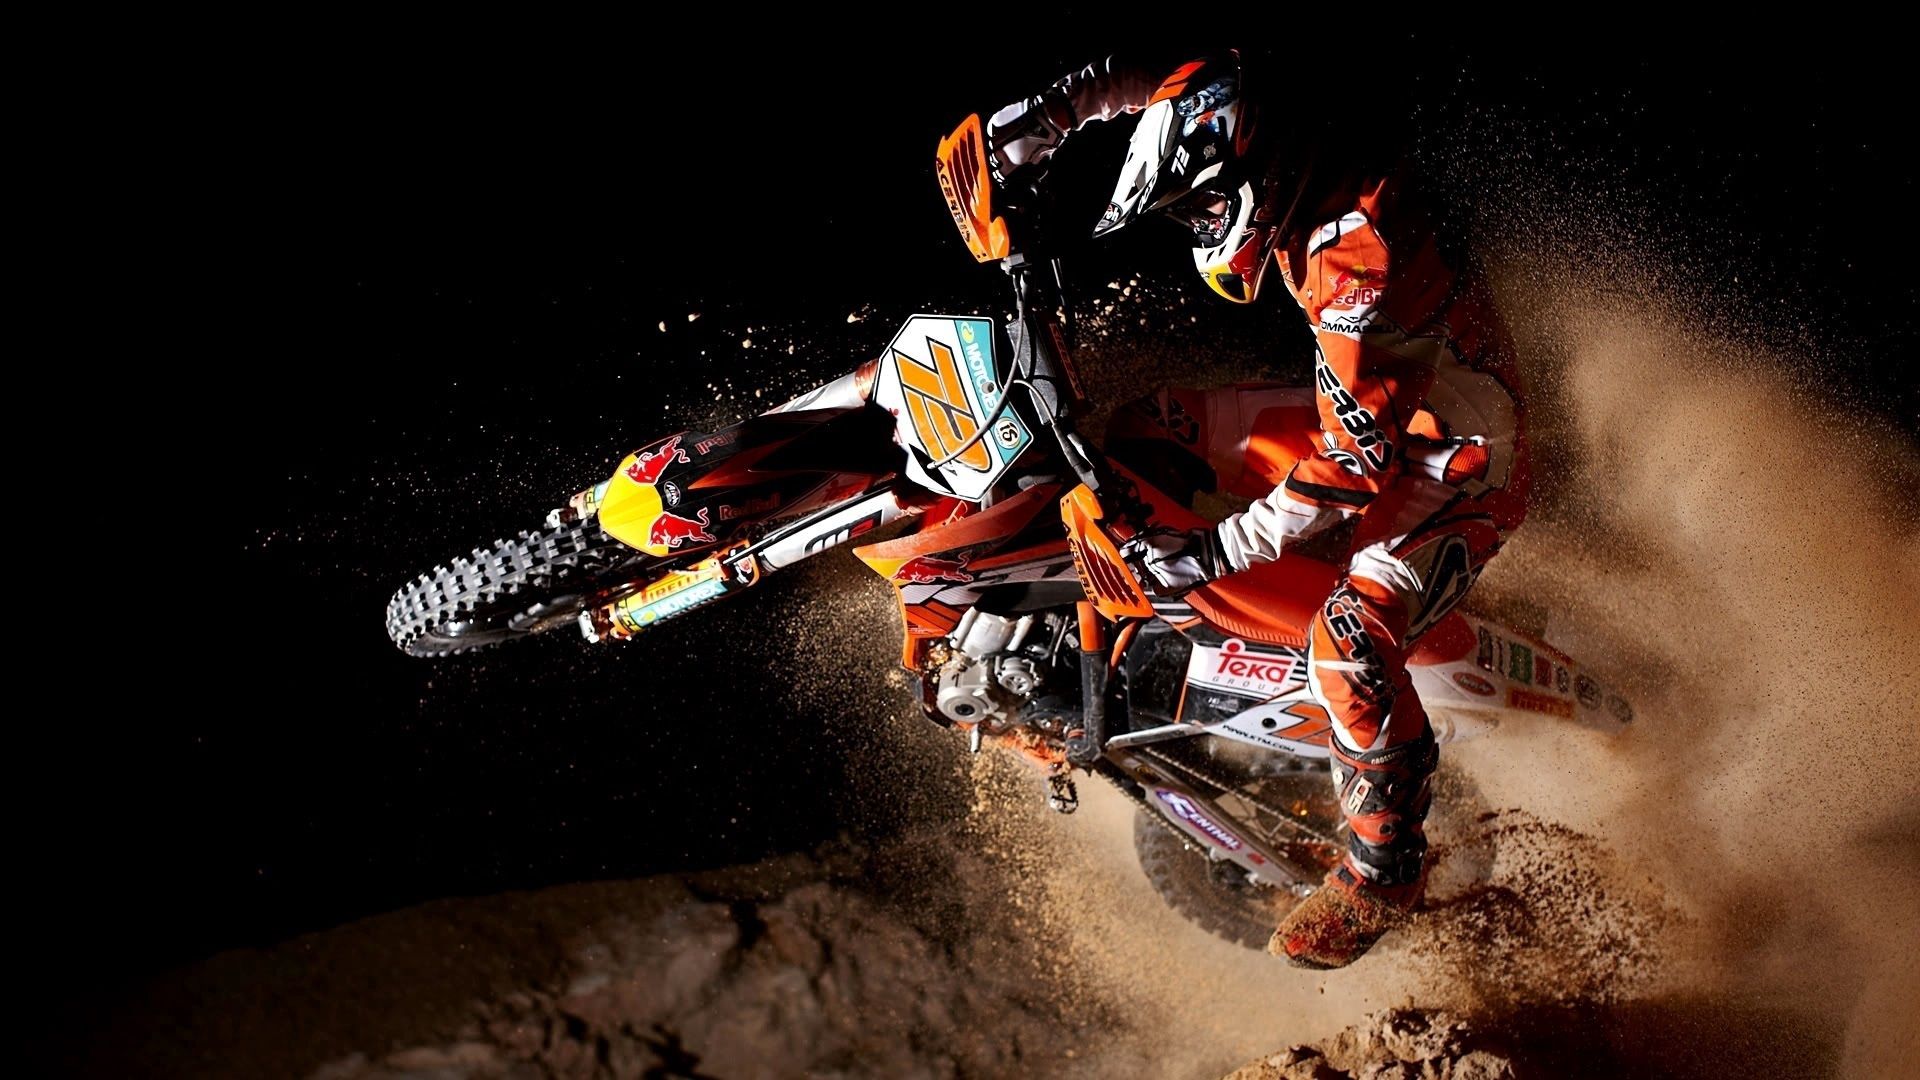 PC Wallpapers motorcycle, motorcycles, x fighters, x games